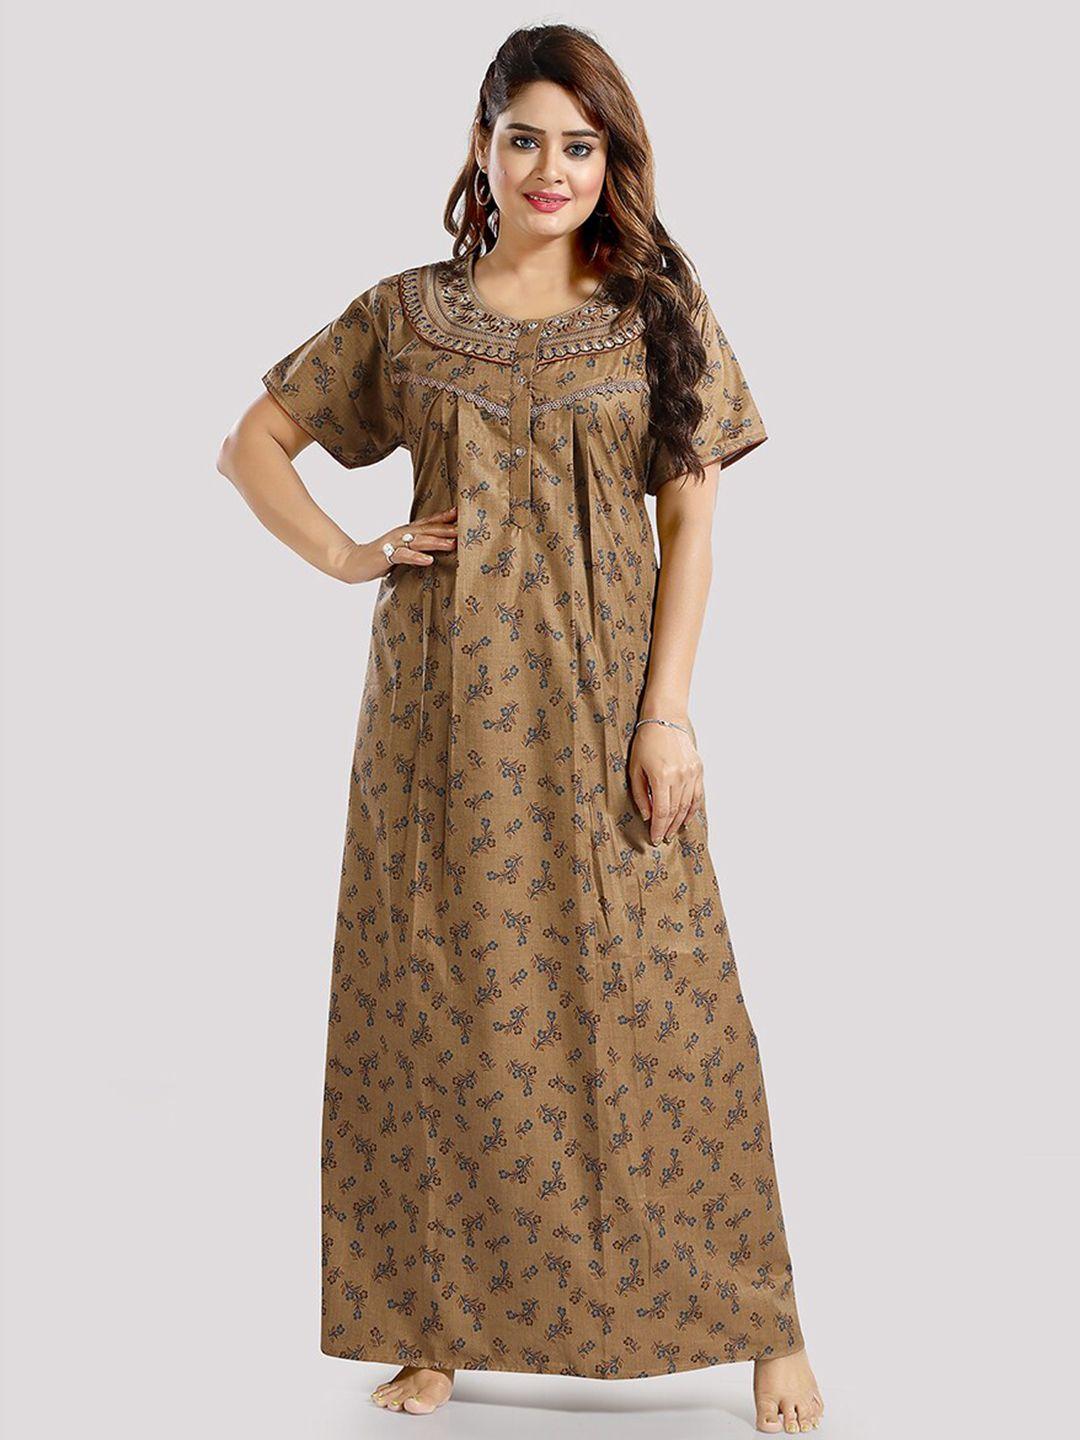 be you floral printed maxi nightdress